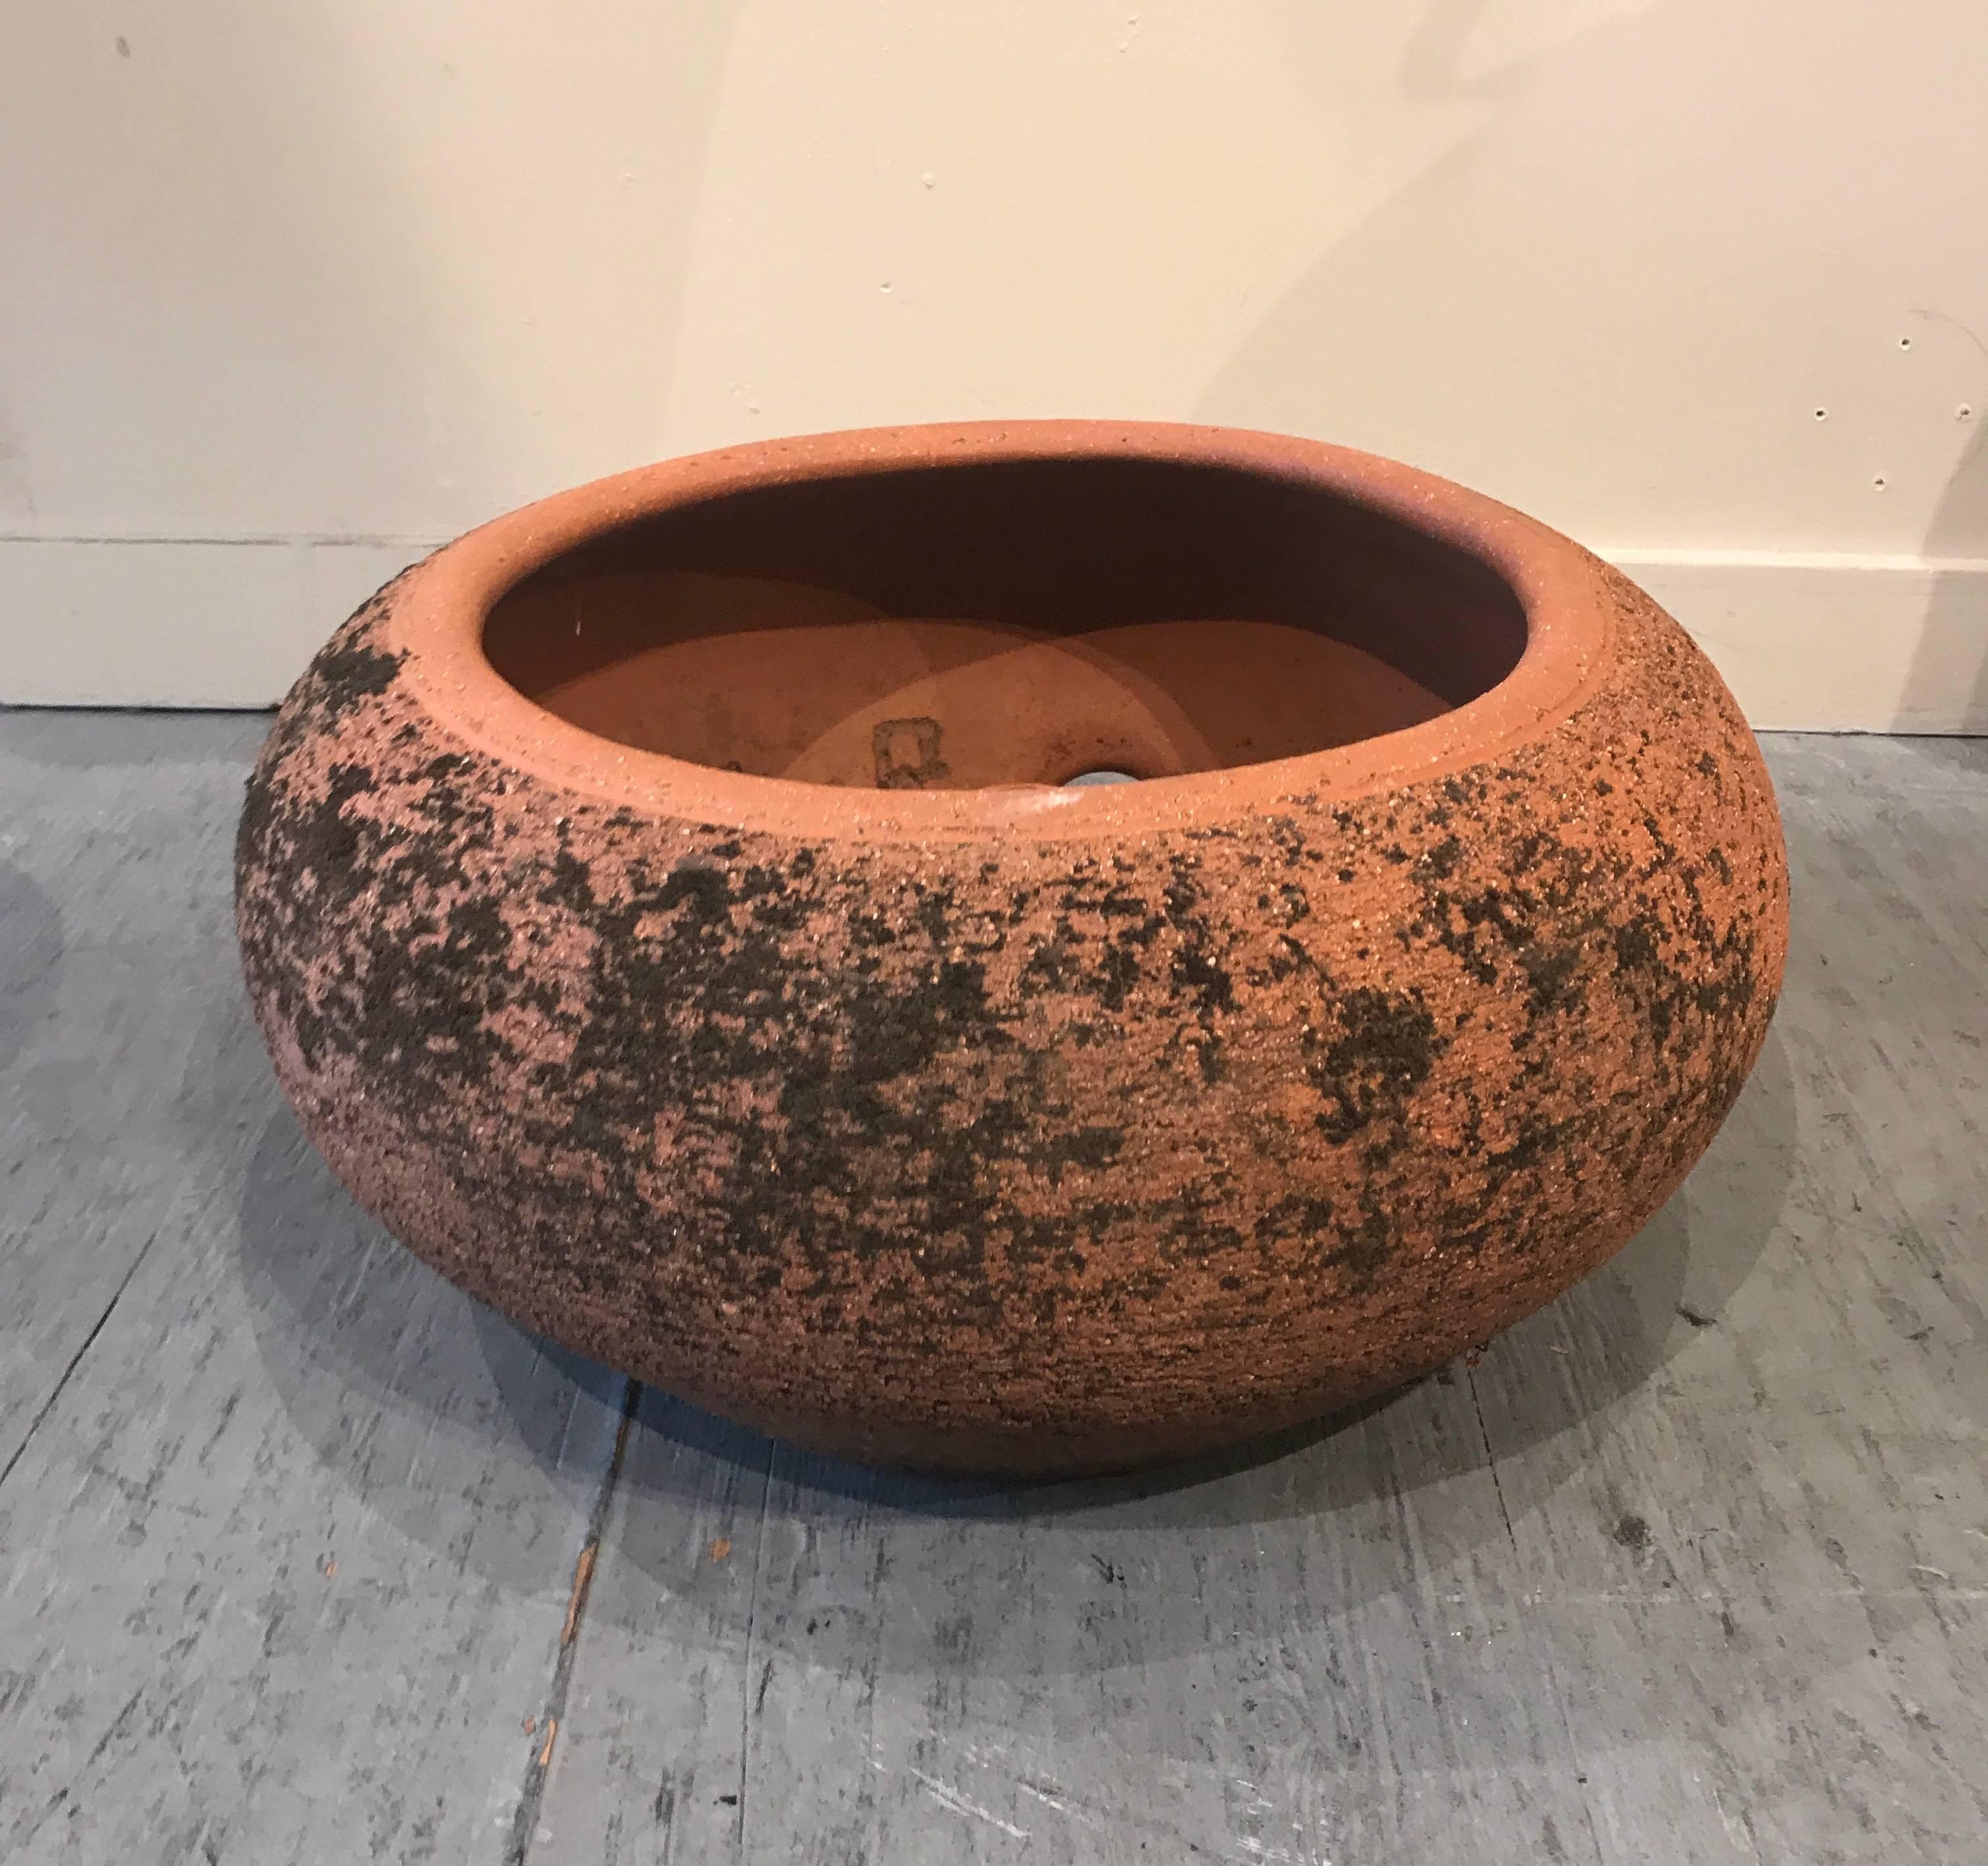 Early studio made garden hose pot by California artist Stan Bitters for Hans Sumpf, great color and texture, keeps the garden hose tidy. Stan Bitters is a well-known studio potter, he has had many group and solo shows over the course of his long